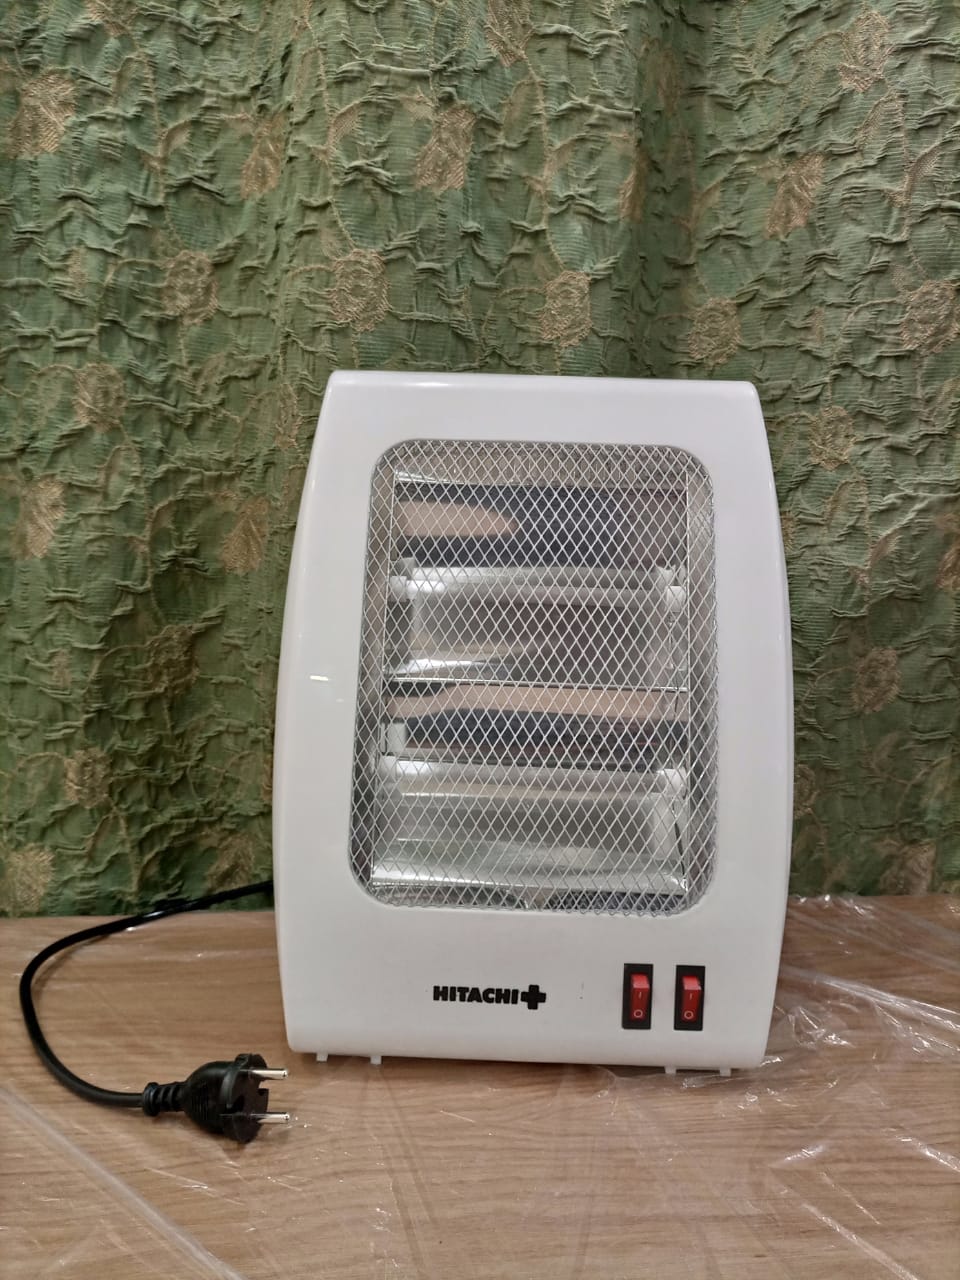 Smart Electric Heater High Quality Stylish Room Heater – Electric Room heater - Heater – Electronic Heater – Room Heater